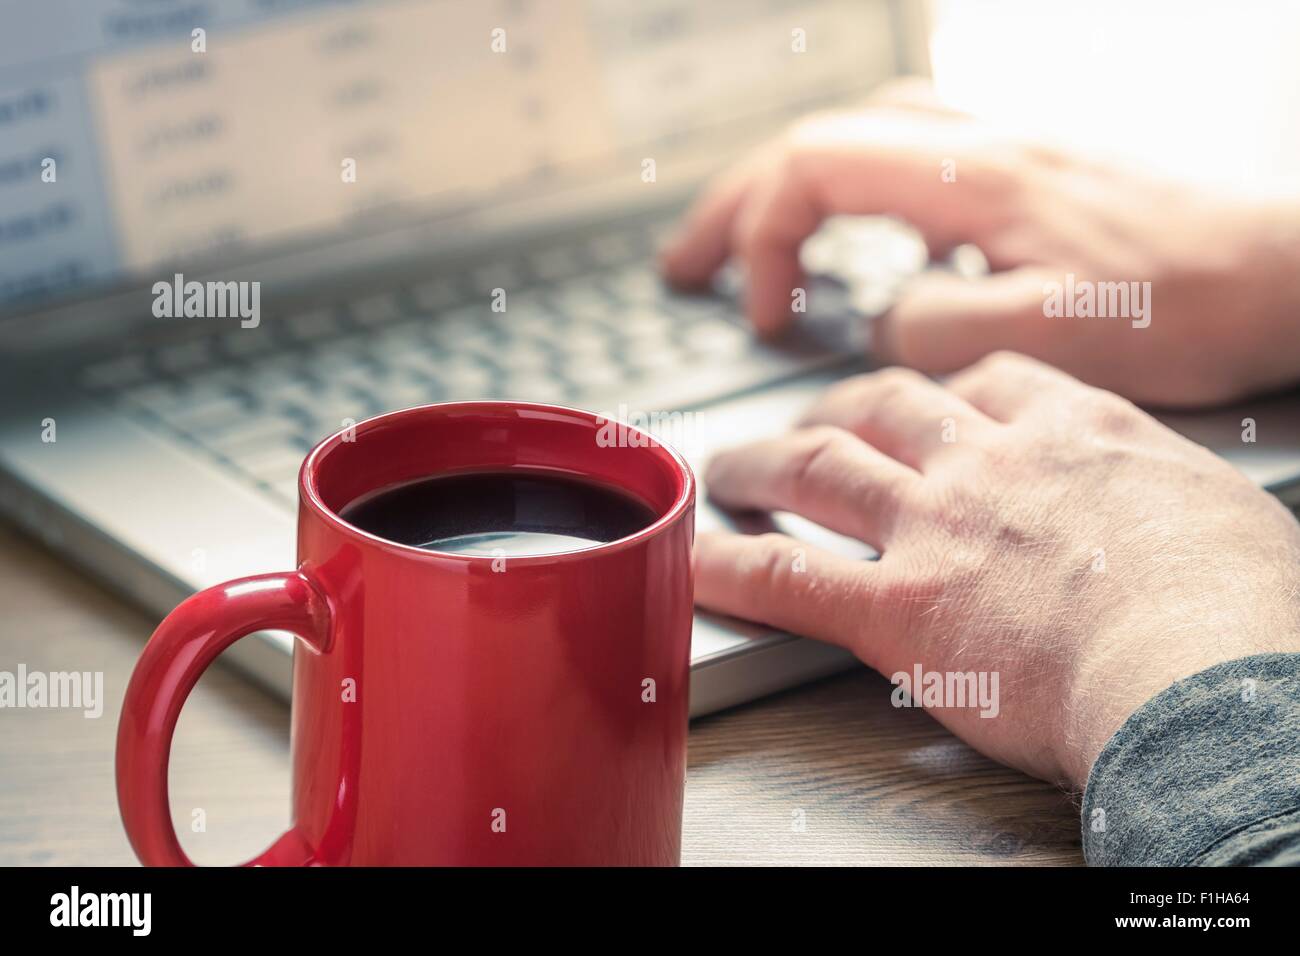 Hands of man typing on laptop at desk Stock Photo